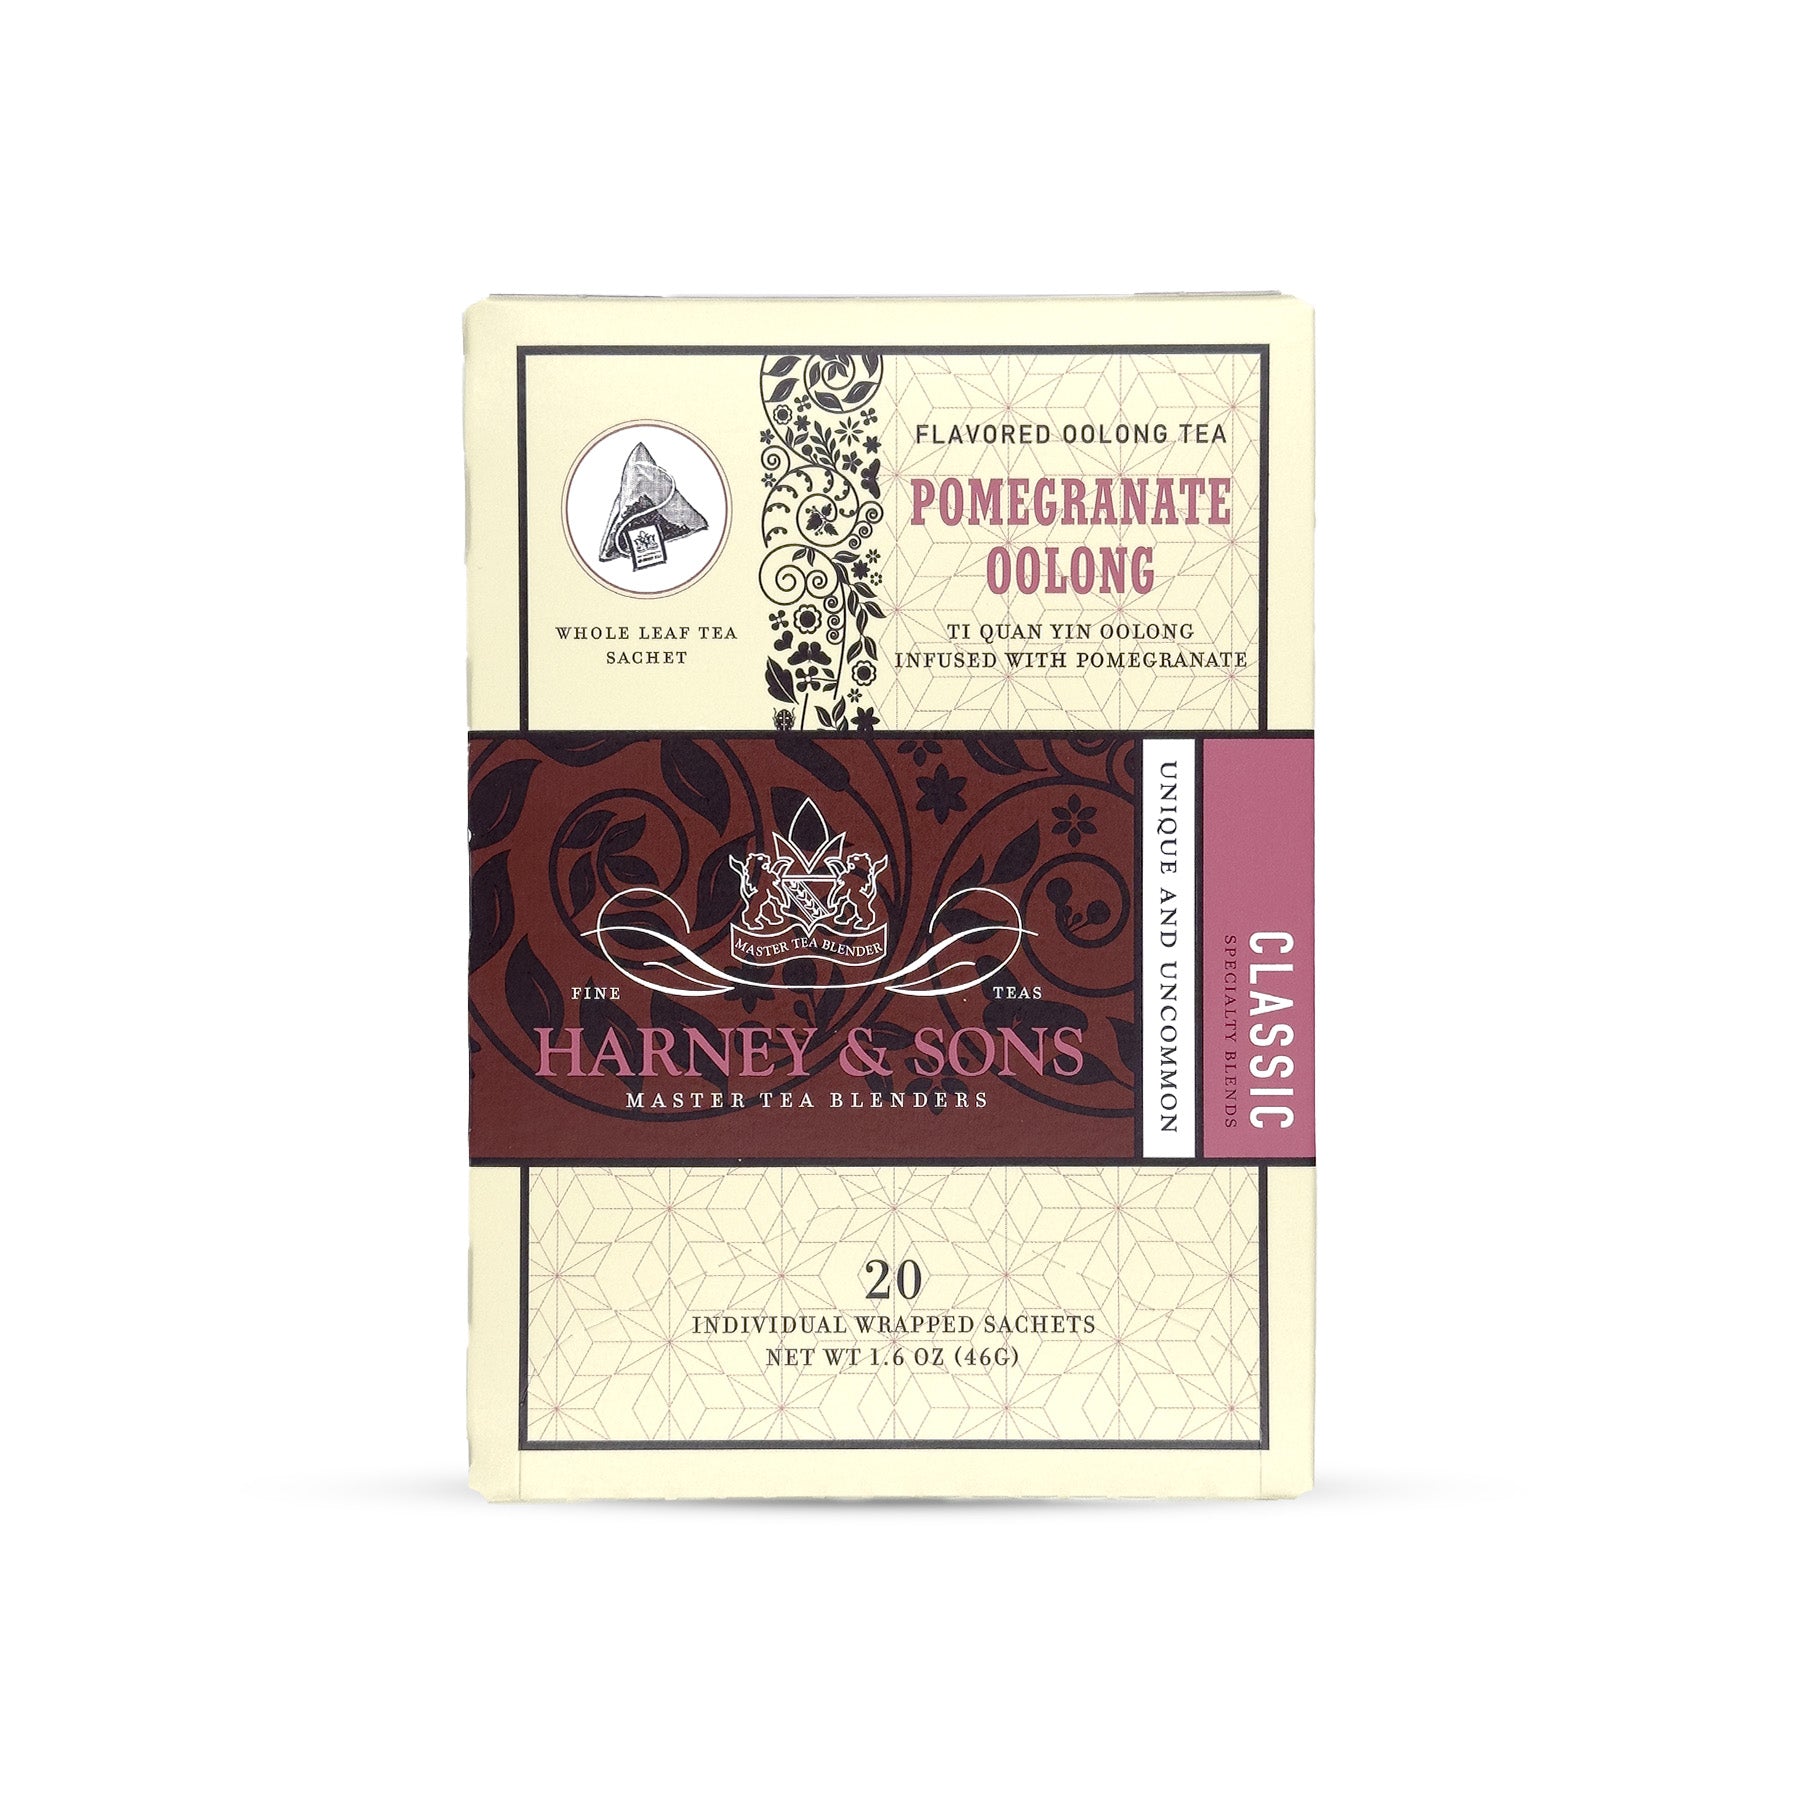 Pomegranate Oolong - Box of 20 Individually Wrapped Sachets - Harney & Sons Fine Teas Europe